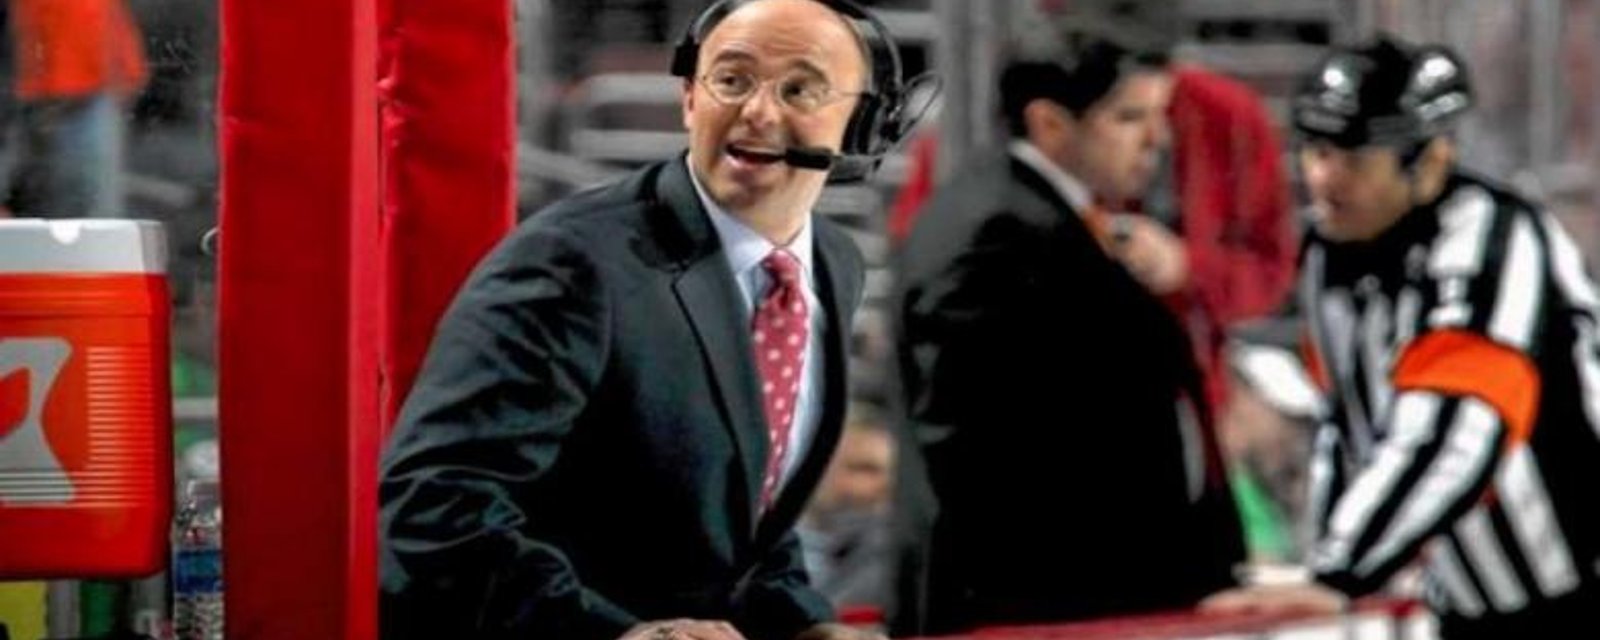 Must See: Pierre McGuire interviews the wrong coach behind the bench!